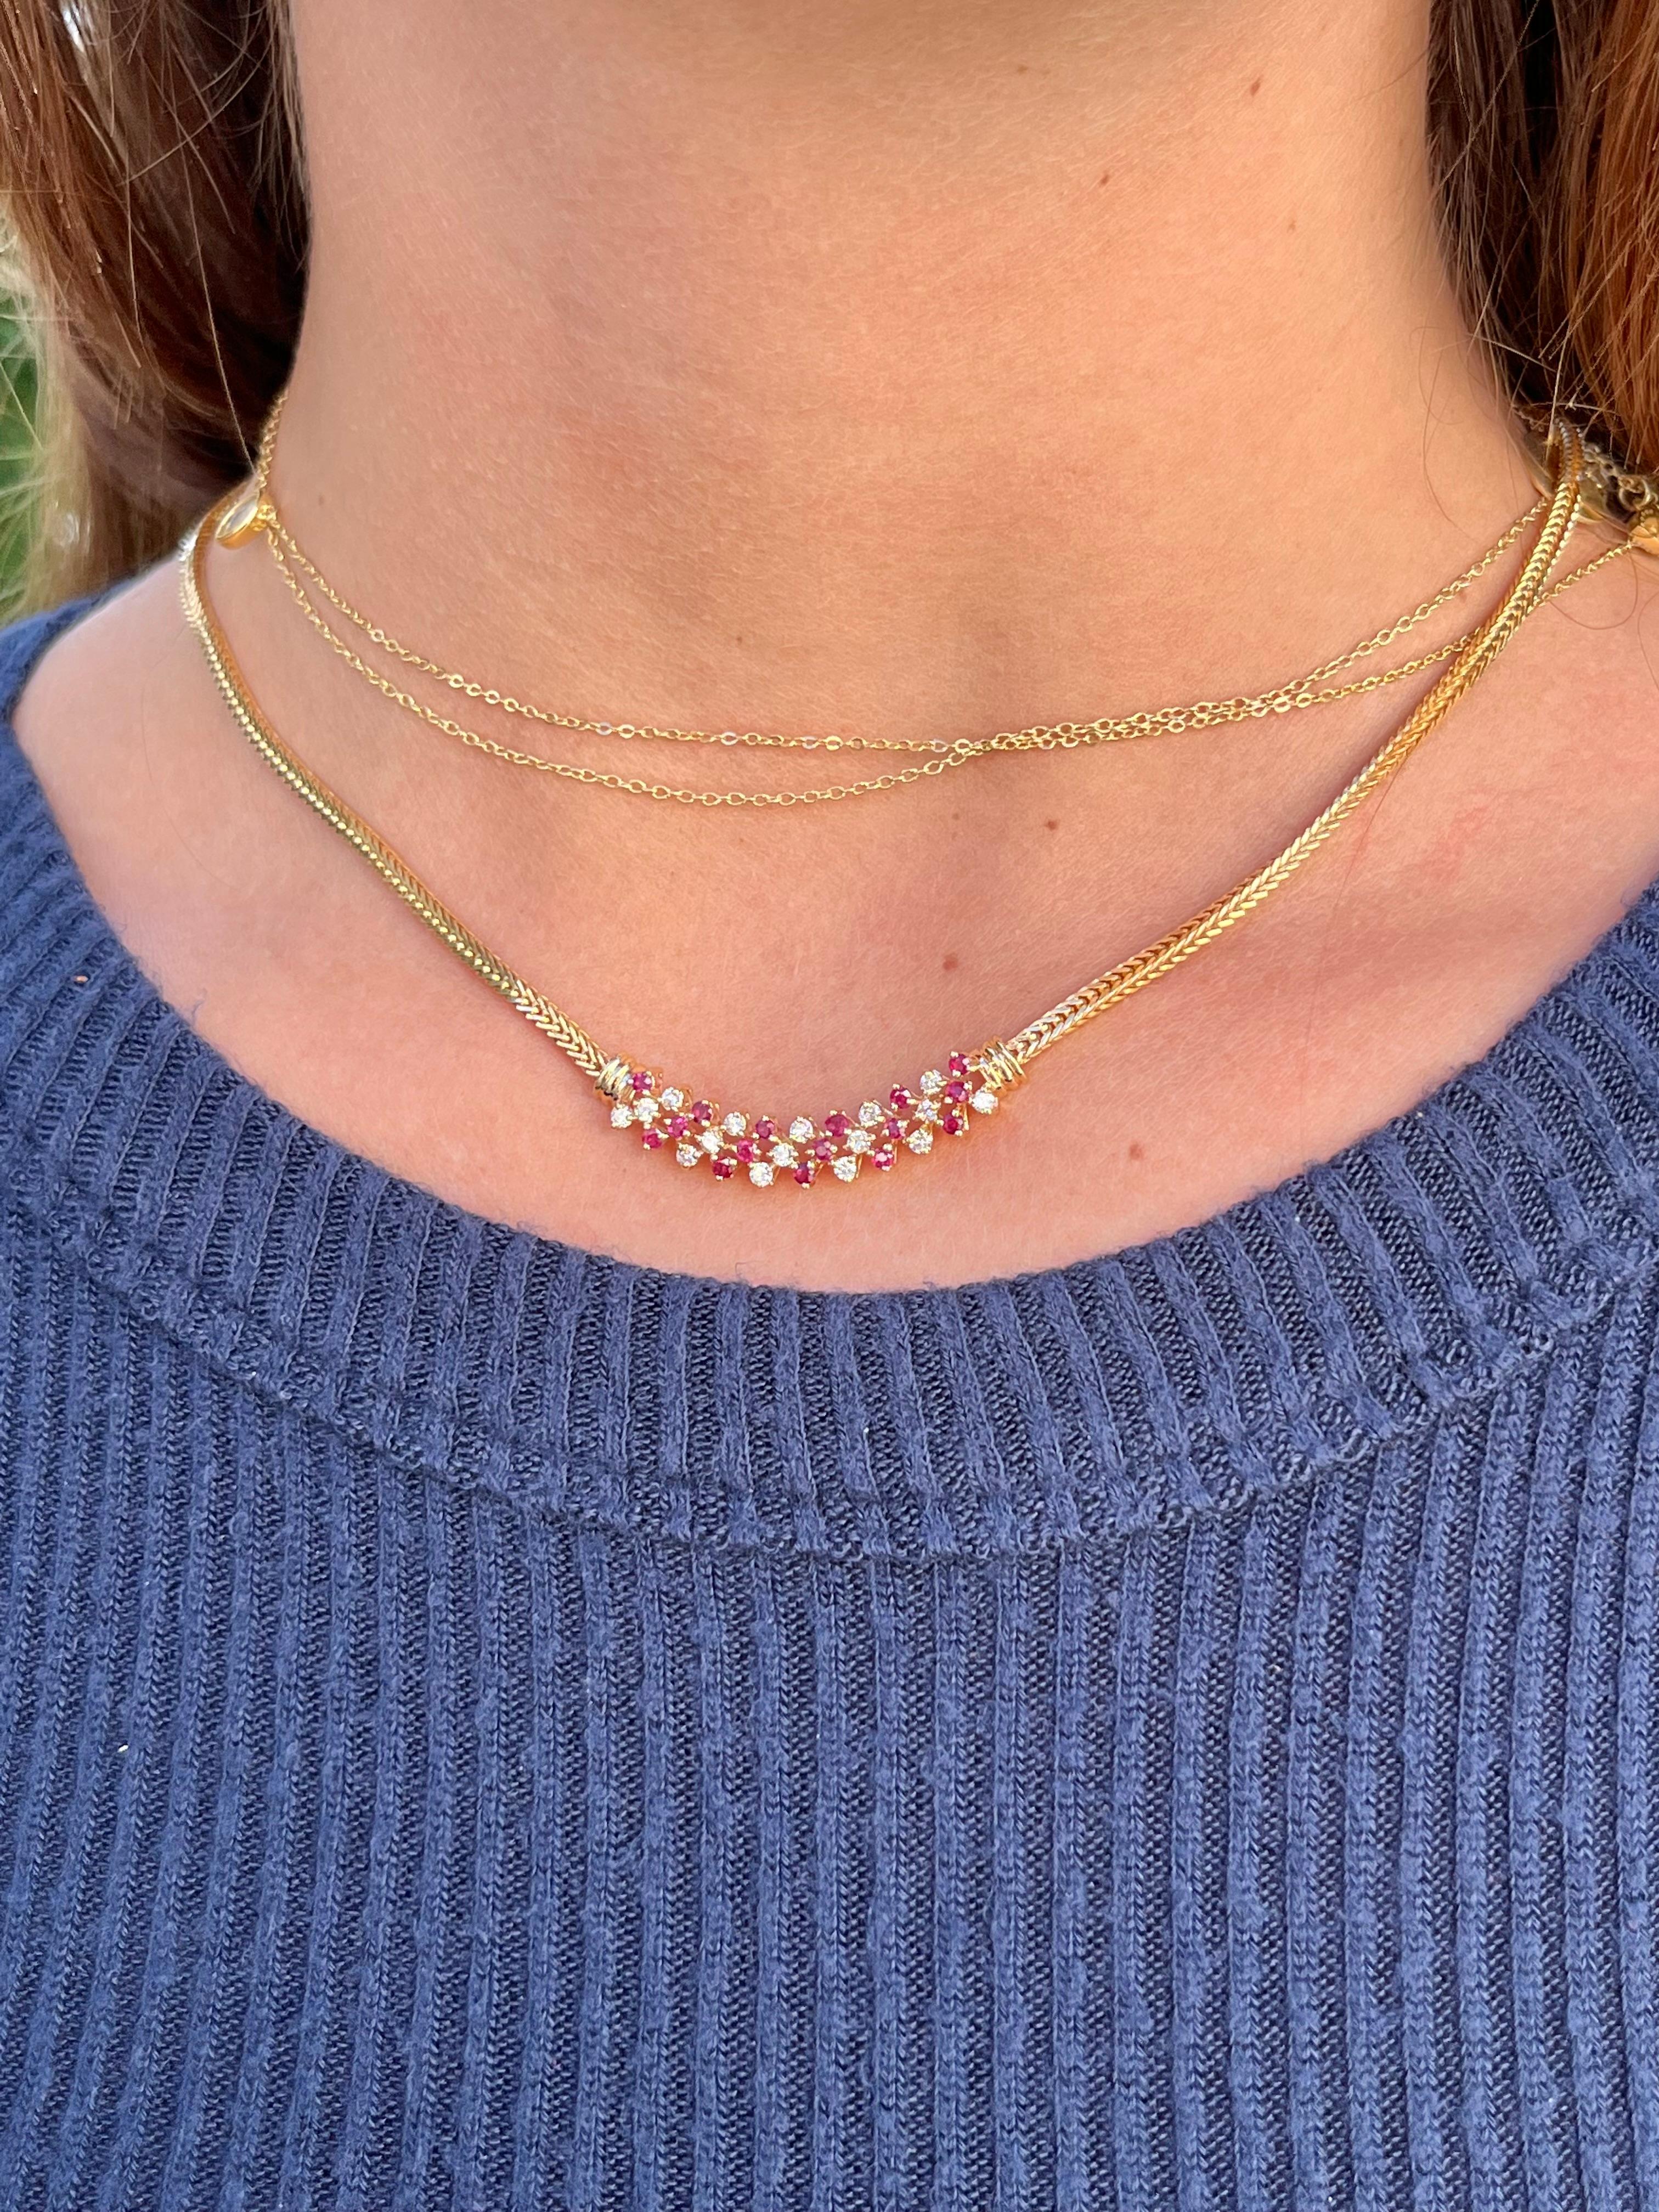 14K yellow gold integral Ruby and Diamond necklace. This stunning gemstone cluster necklace has a comfortable integration with the 14k gold wheat chain. The necklace is versatile enough for special occasions and daily wear.

Specifics:
✔ Gold Karat: